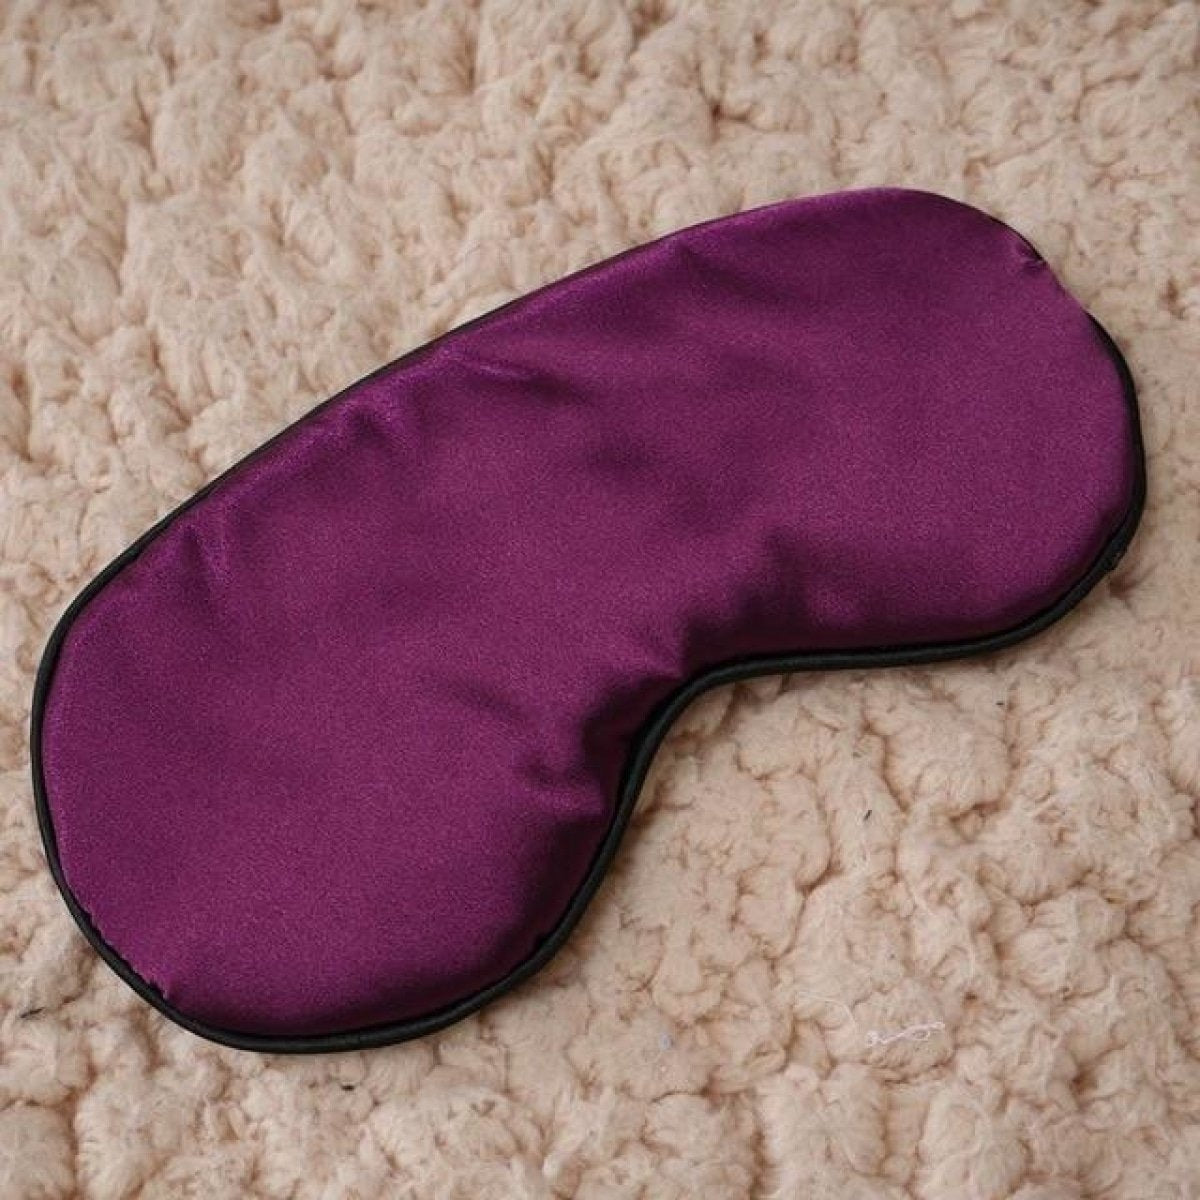 Silk Sleep Rest Eye Mask Padded Shade Cover Travel Relax Aid | Asia Sell | Purple